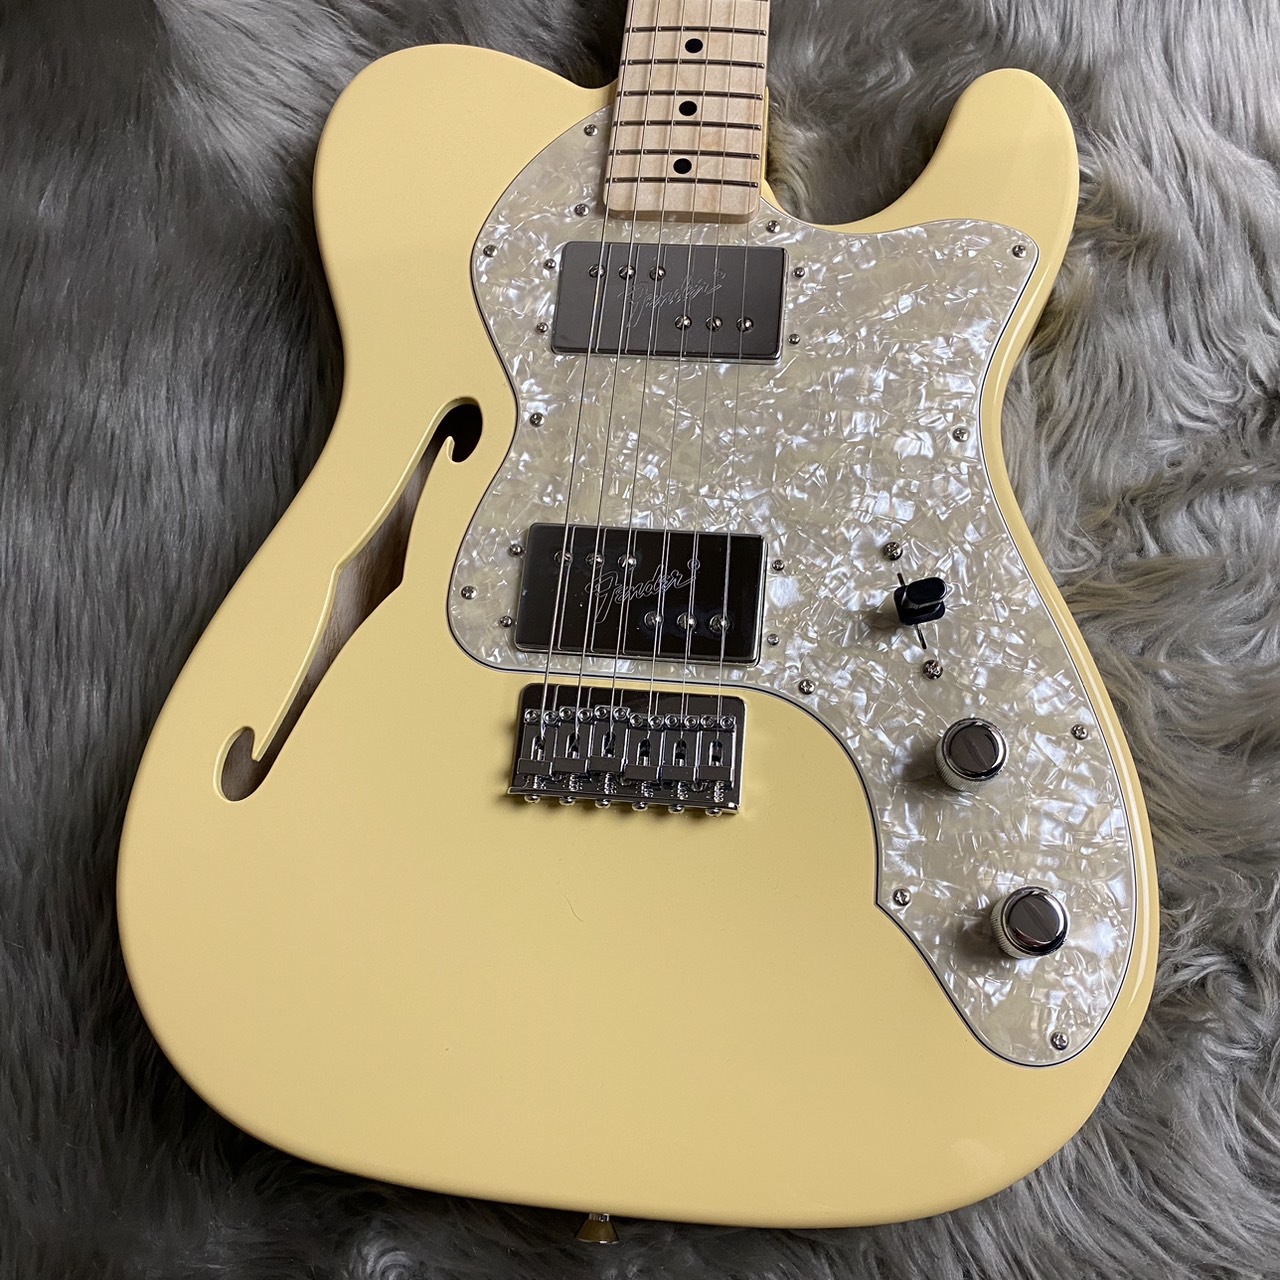 CONTENTSFender FSR Collection 2023 Traditional 70s Telecaster Thinline Maple Fingerboard Vintage【現物画像】ギターアドバイザーが楽器選びをサポート最新情報を手に入れよう分割無金利キャンペーン音楽教室も開講 […]